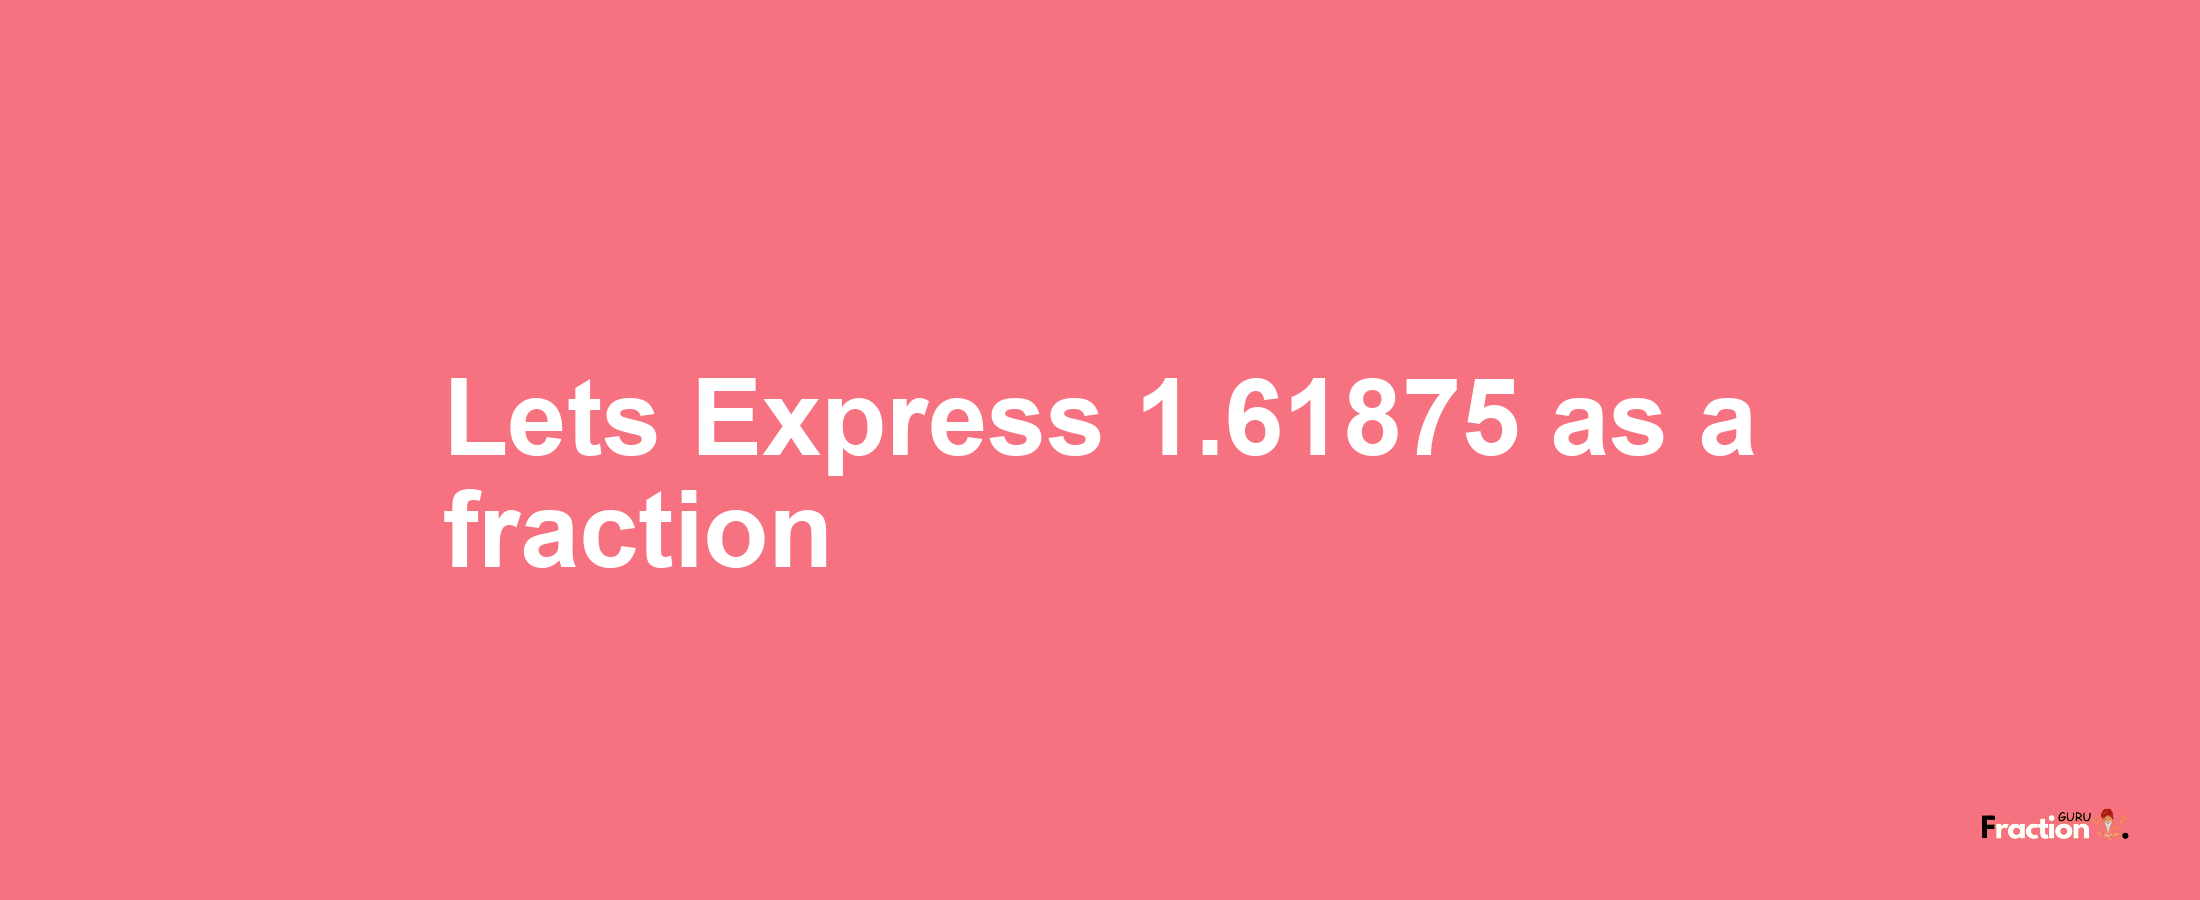 Lets Express 1.61875 as afraction